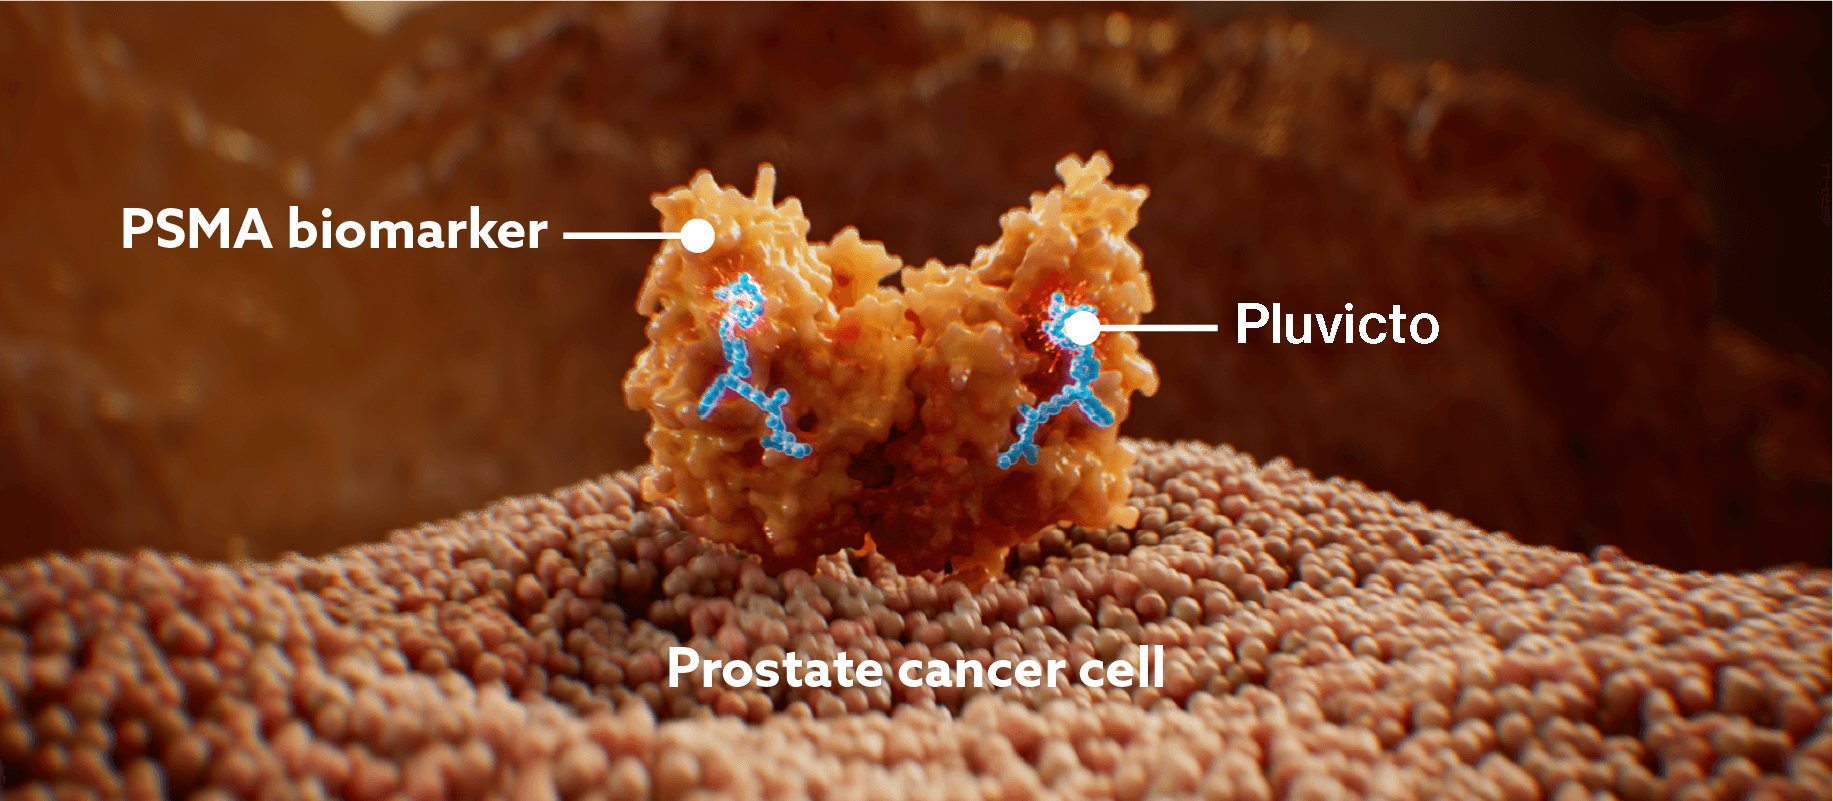 Image to highlight how Pluvicto binds to PSMA on prostate cancer cells.